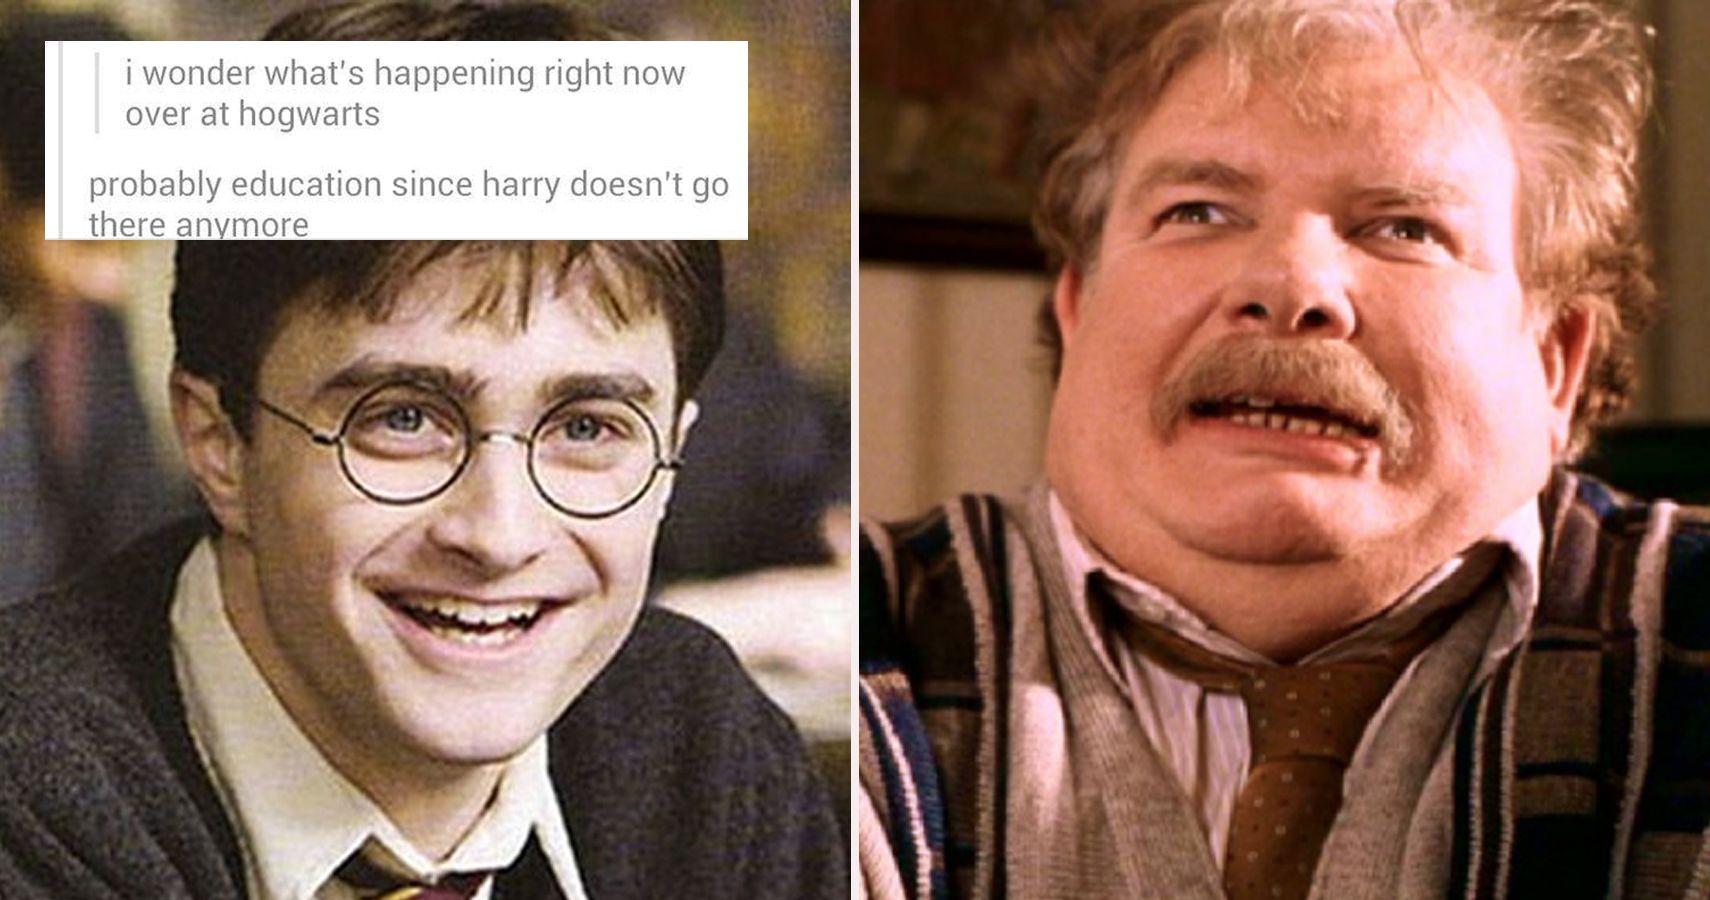 25 Hilarious Harry Potter Memes That Change The Way We See The